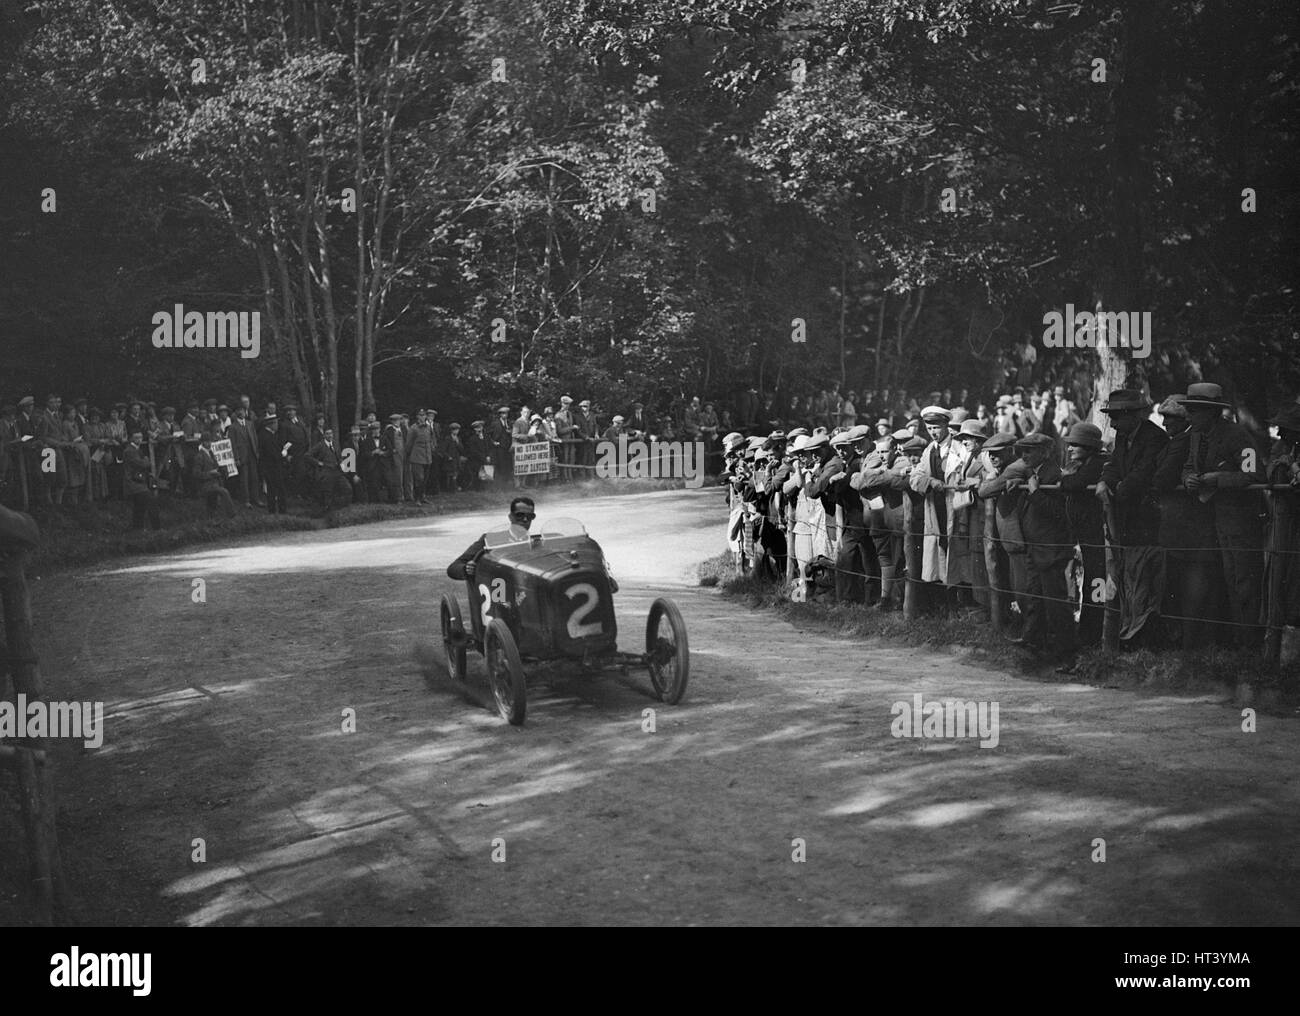 Works Austin 7 of Arthur Waite competing in the MAC Shelsley Walsh Hillclimb, Worcestershire, 1923. Artist: Bill Brunell. Stock Photo